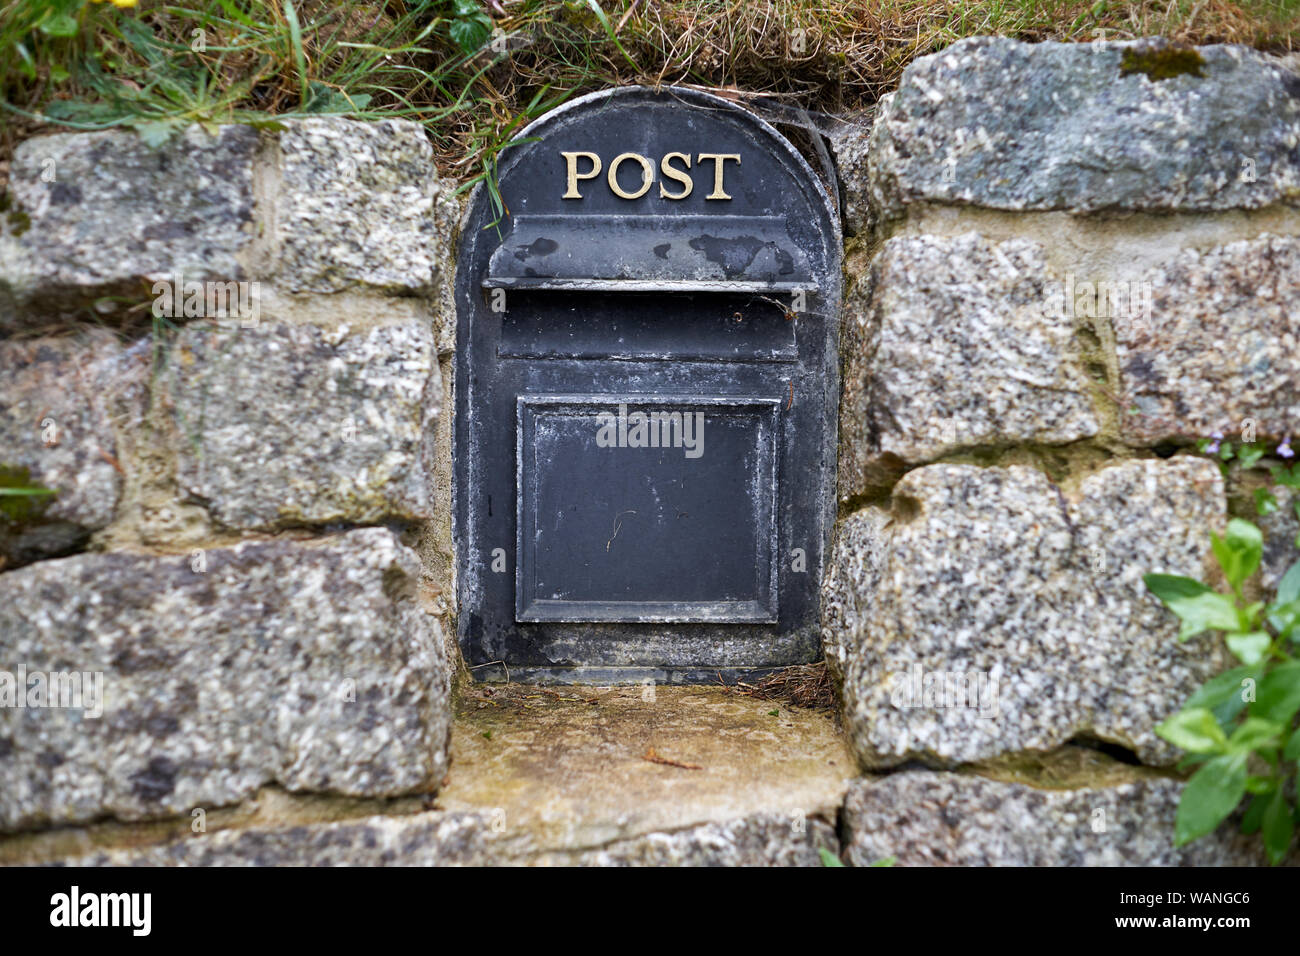 There is an old English metal mailbox built into the stone wall. Stock Photo